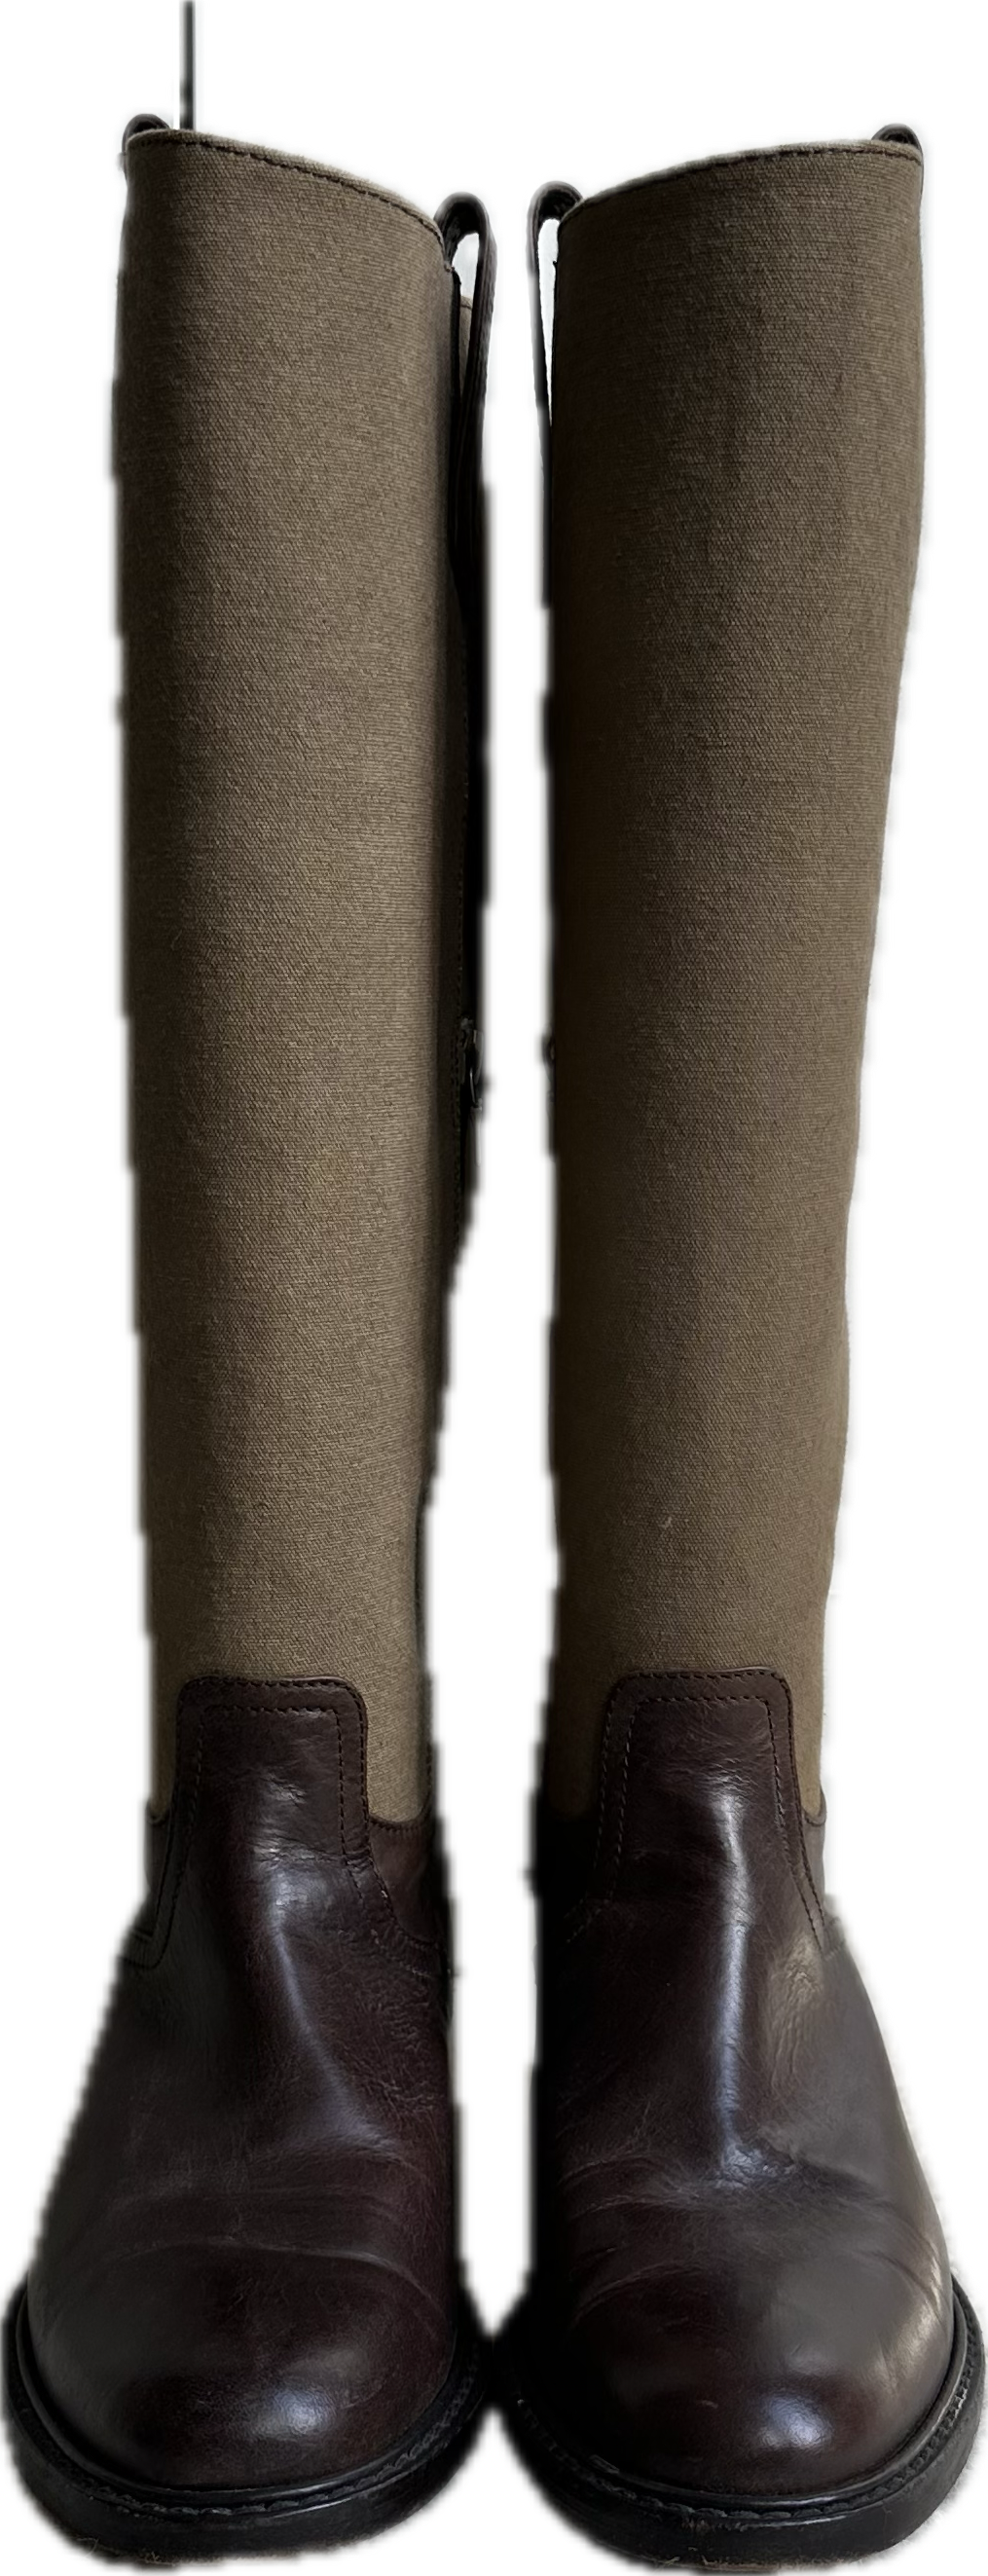 Dries Van Noten Canvas And Leather Knee-High Riding Boots